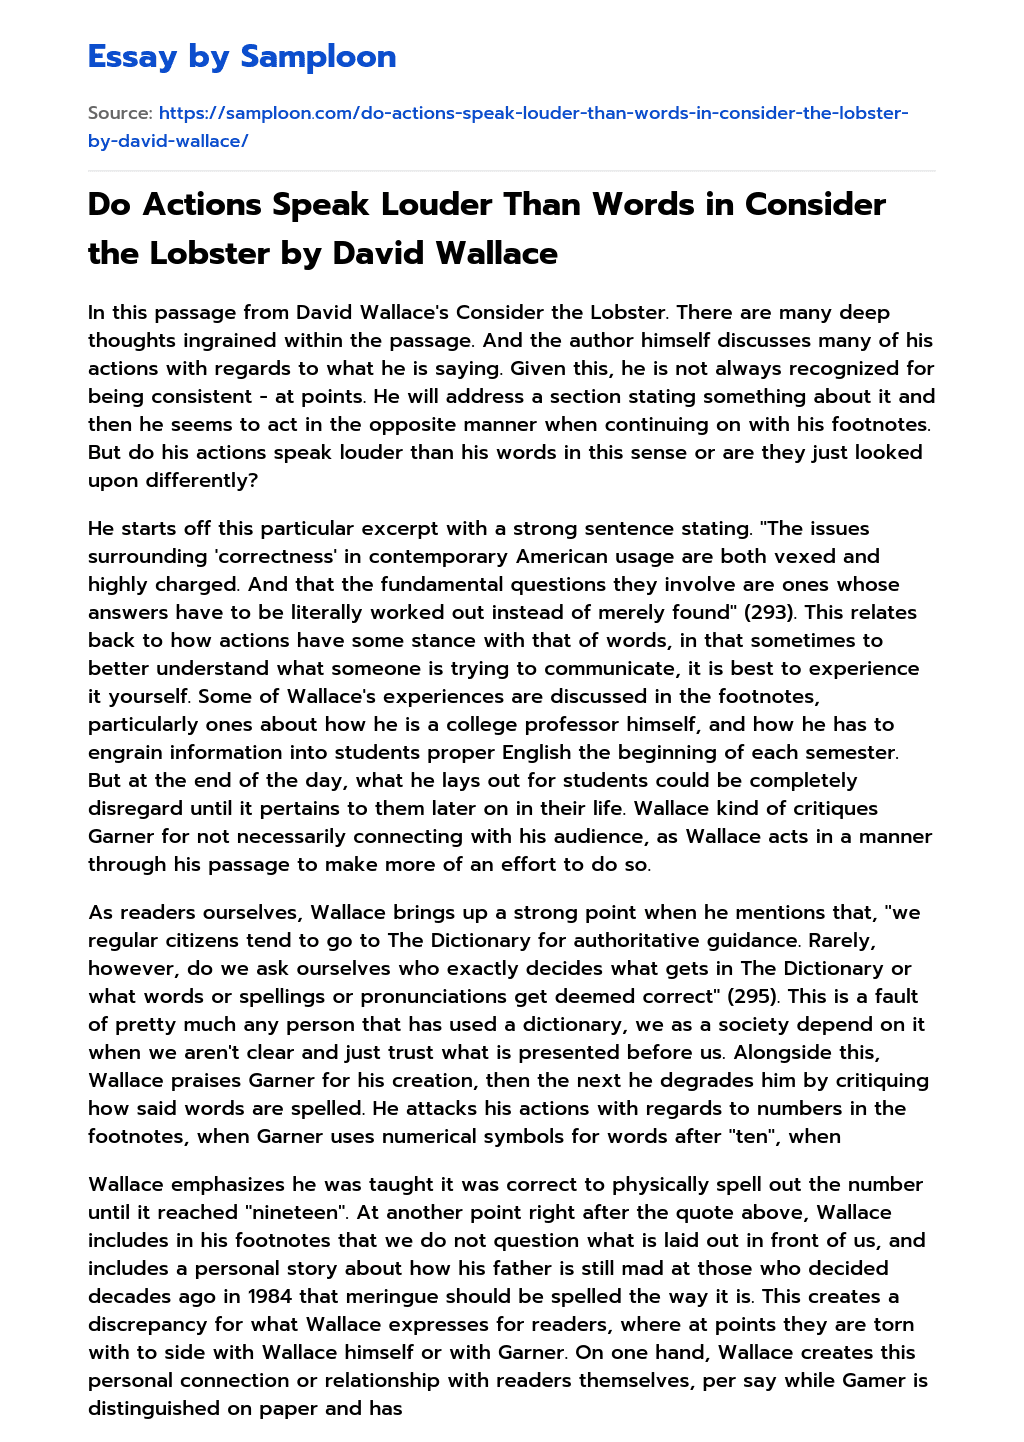 Do Actions Speak Louder Than Words in Consider the Lobster by David Wallace essay